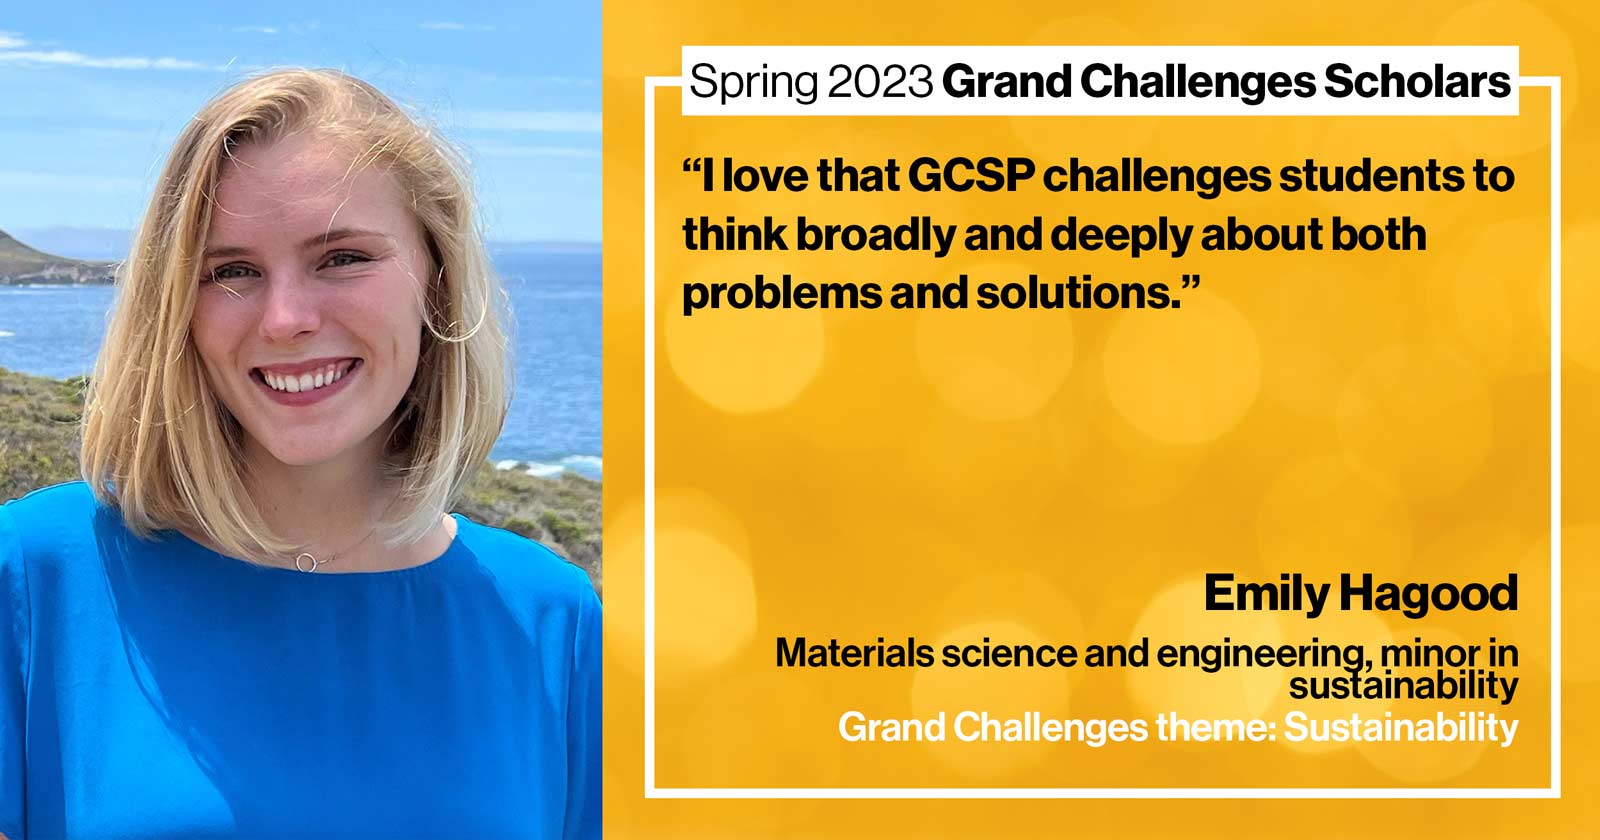 "Emily Hagood Materials science and engineering Grand Challenge: Sustainability Quote: “I love that GCSP challenges students to think broadly and deeply about both problems and solutions.”"